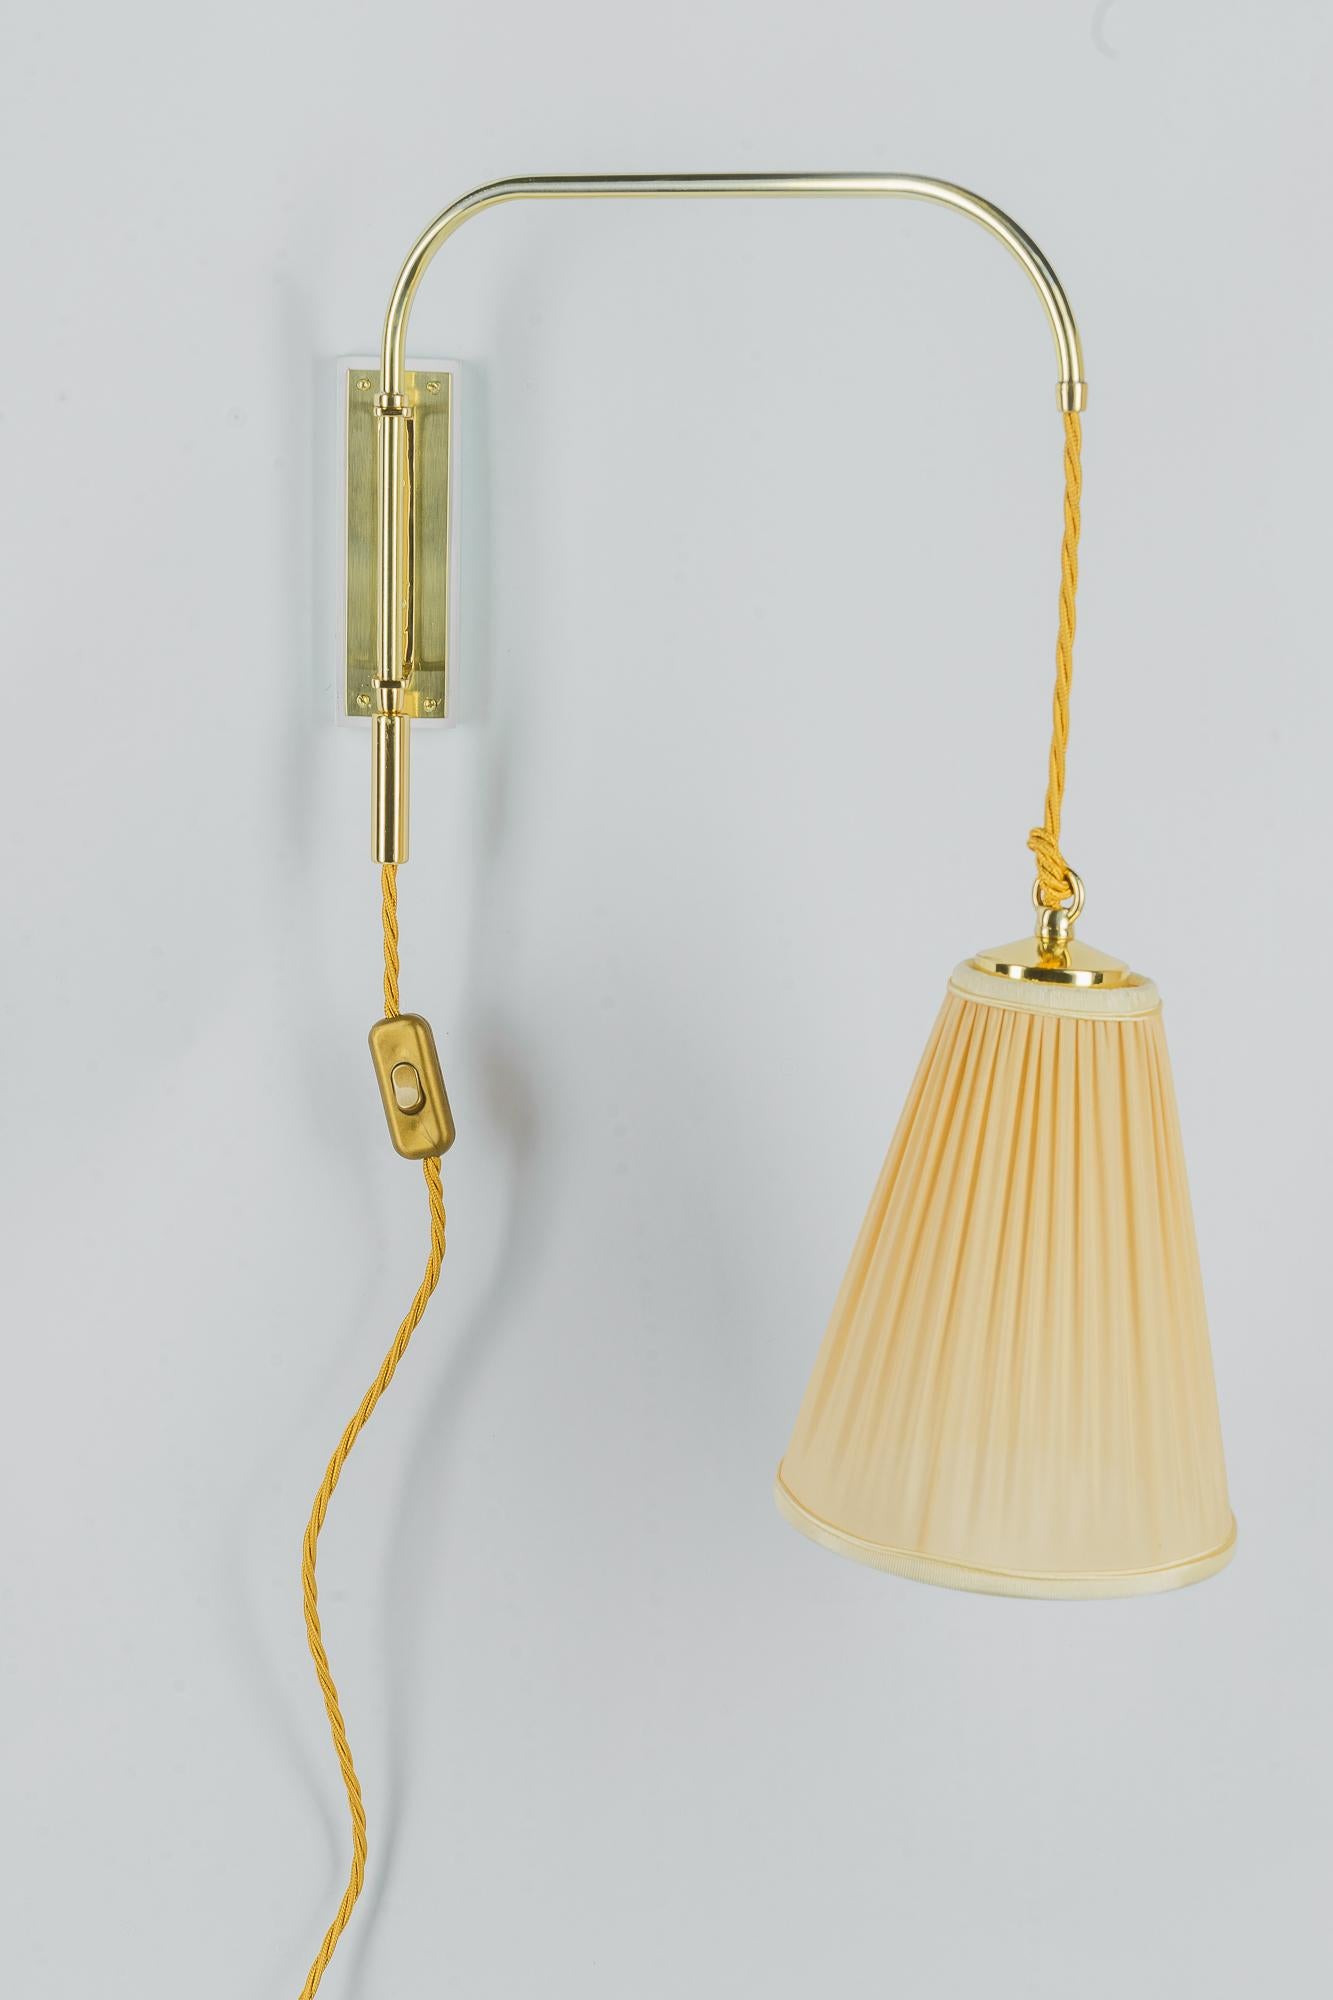  Cable in height adjustable art deco wall lamp 1920s In Good Condition For Sale In Wien, AT